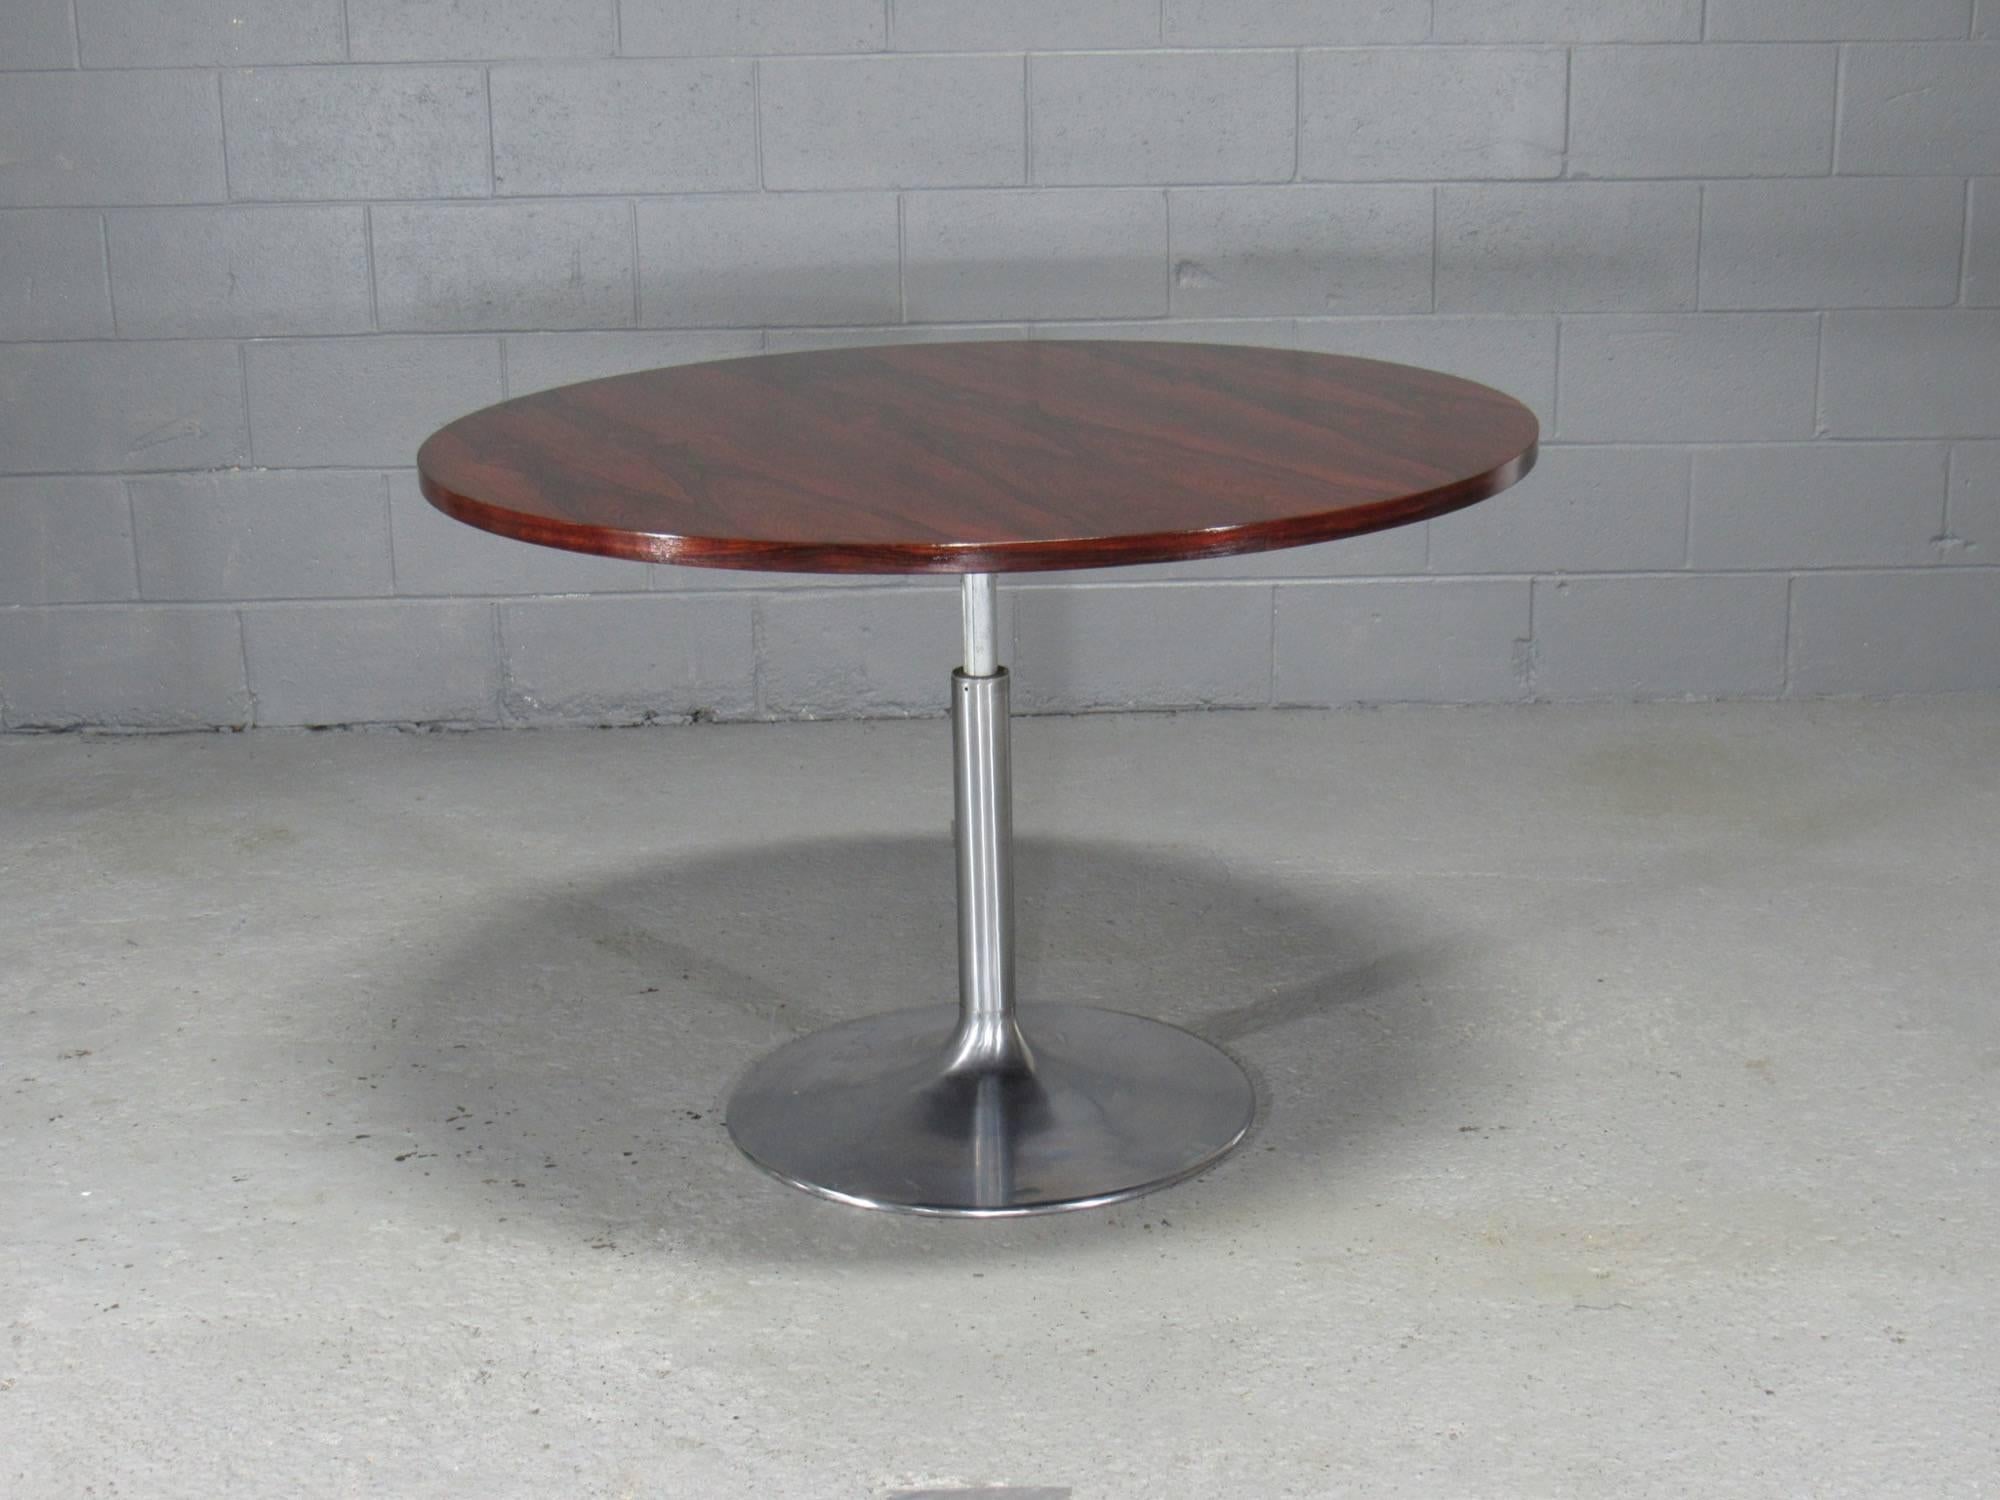 Height-Adjustable Round Rosewood Pedestal Table. Tables raises and lowers with lever. Height can be adjusted from 22